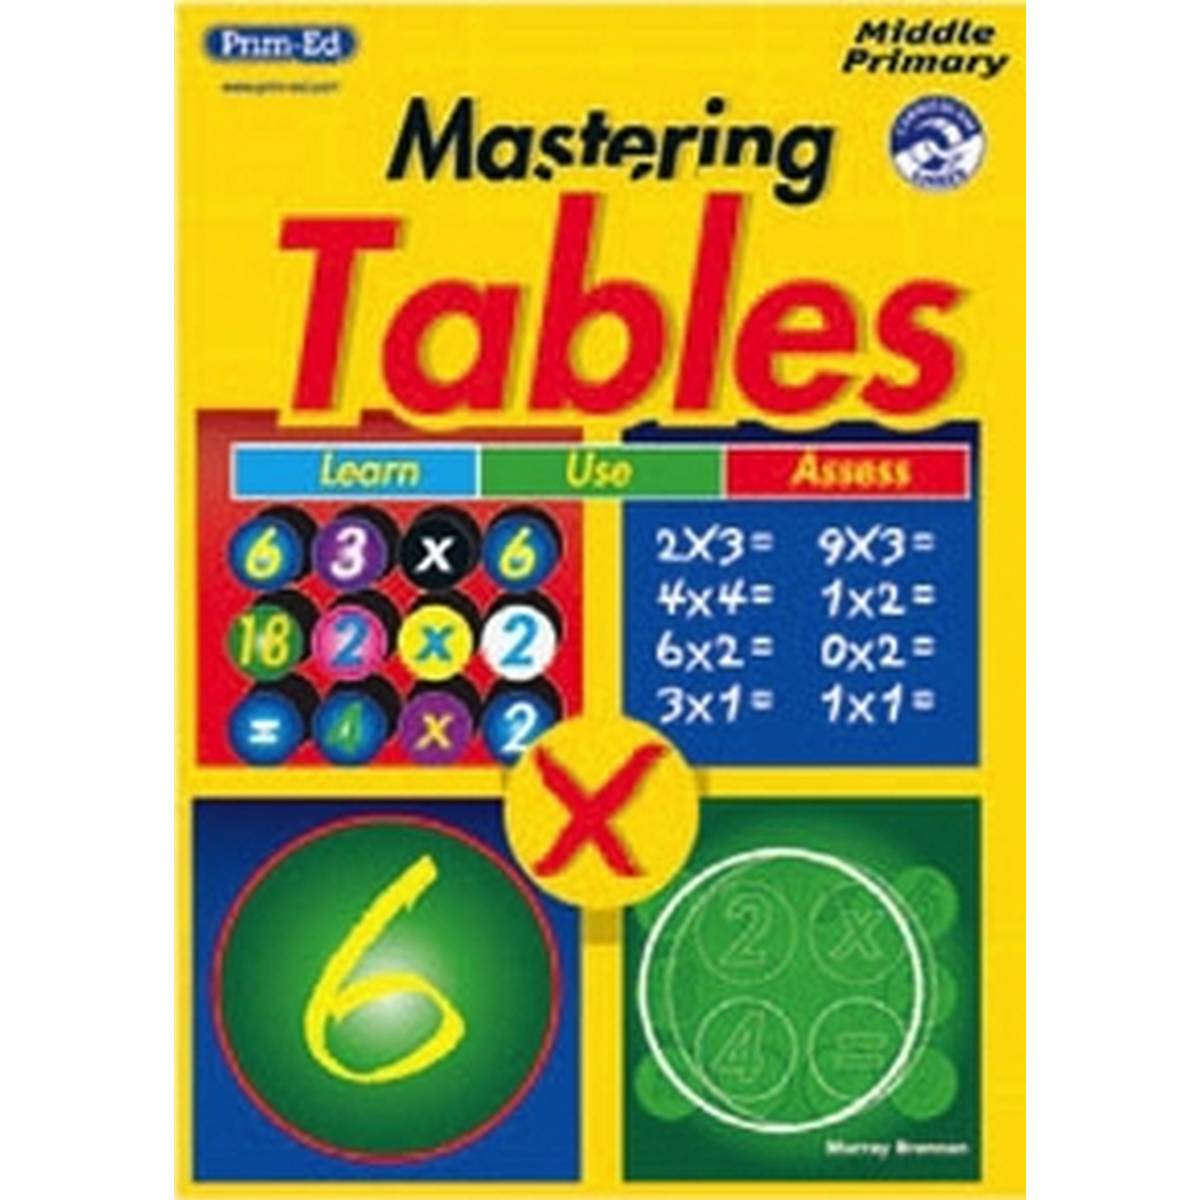 Mastering Tables